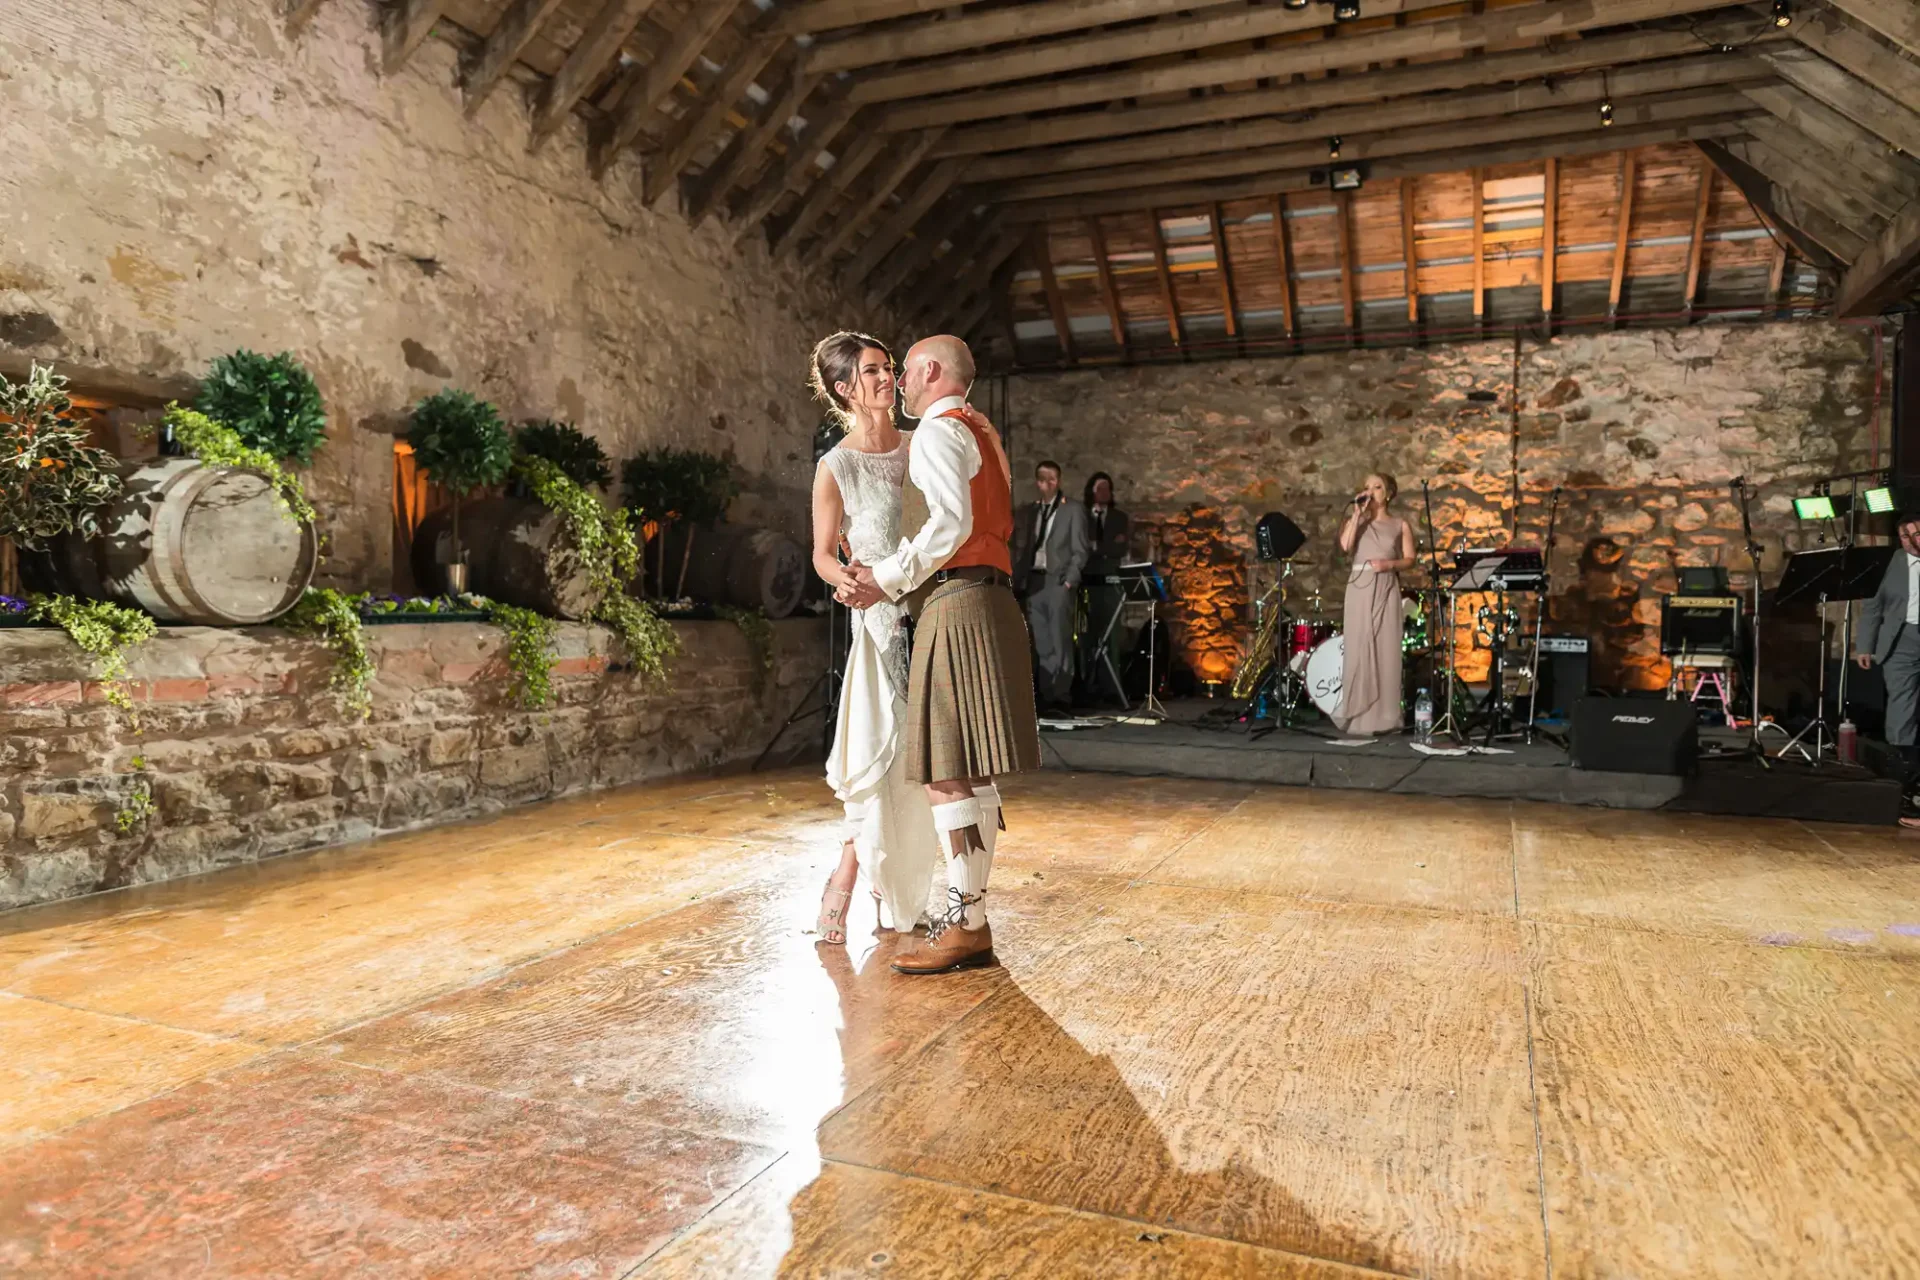 A bride and groom share a dance in a rustic barn venue with a band playing in the background.